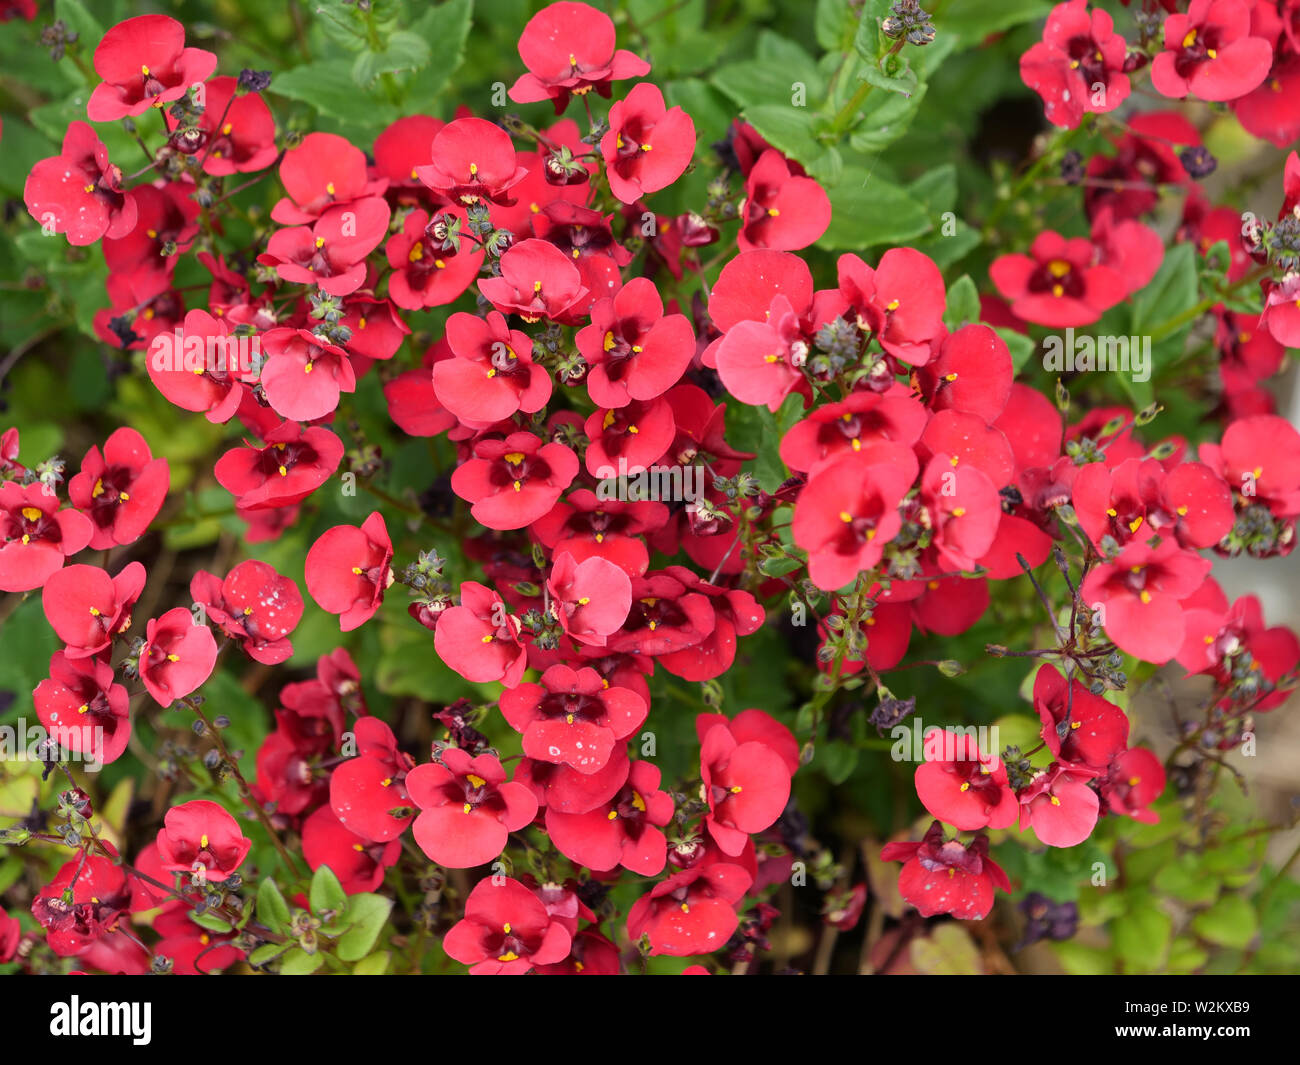 Strong Red Flowers Of Diascia Plant Flowering In The Garden Stock Photo Alamy